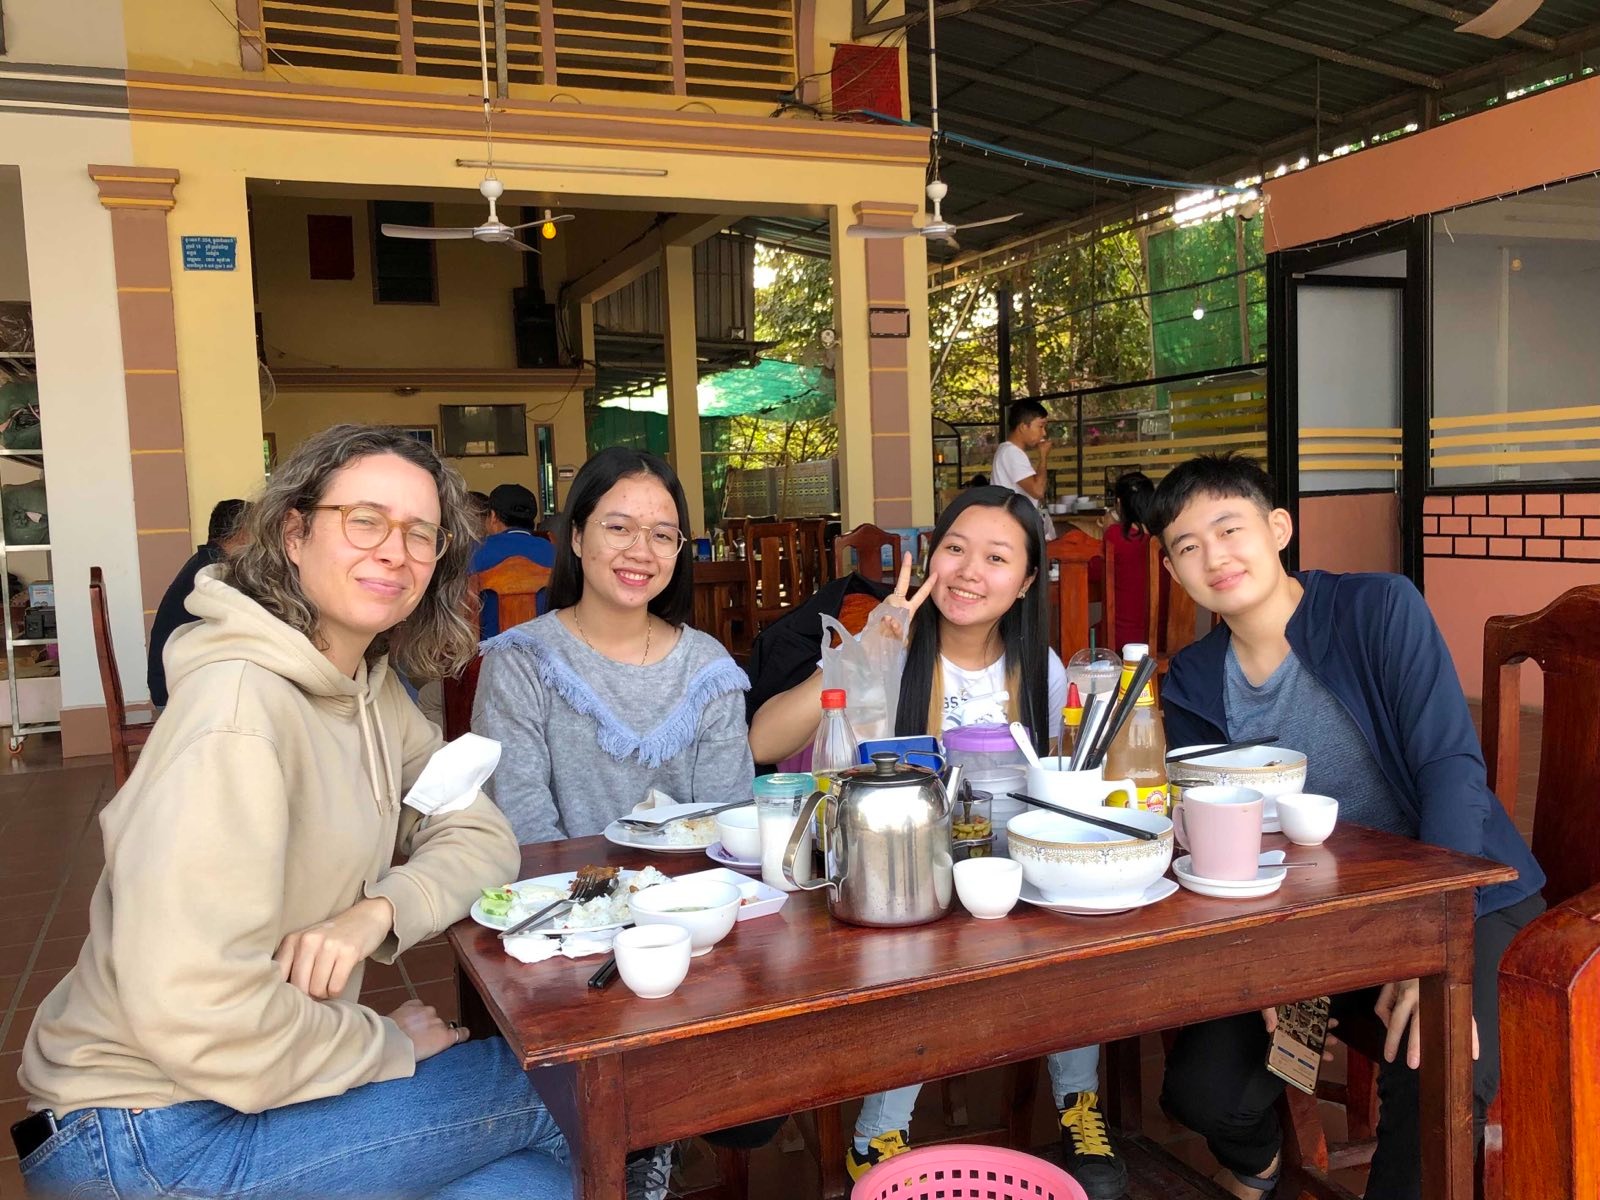 OPCC mentor Marta Kasztelan, Newsroom trainees Som Sreypich and Klaing Kimhouy, and OPCC mentor Cindy Liu (from left) take a lunch break during a reporting trip in January 2021.